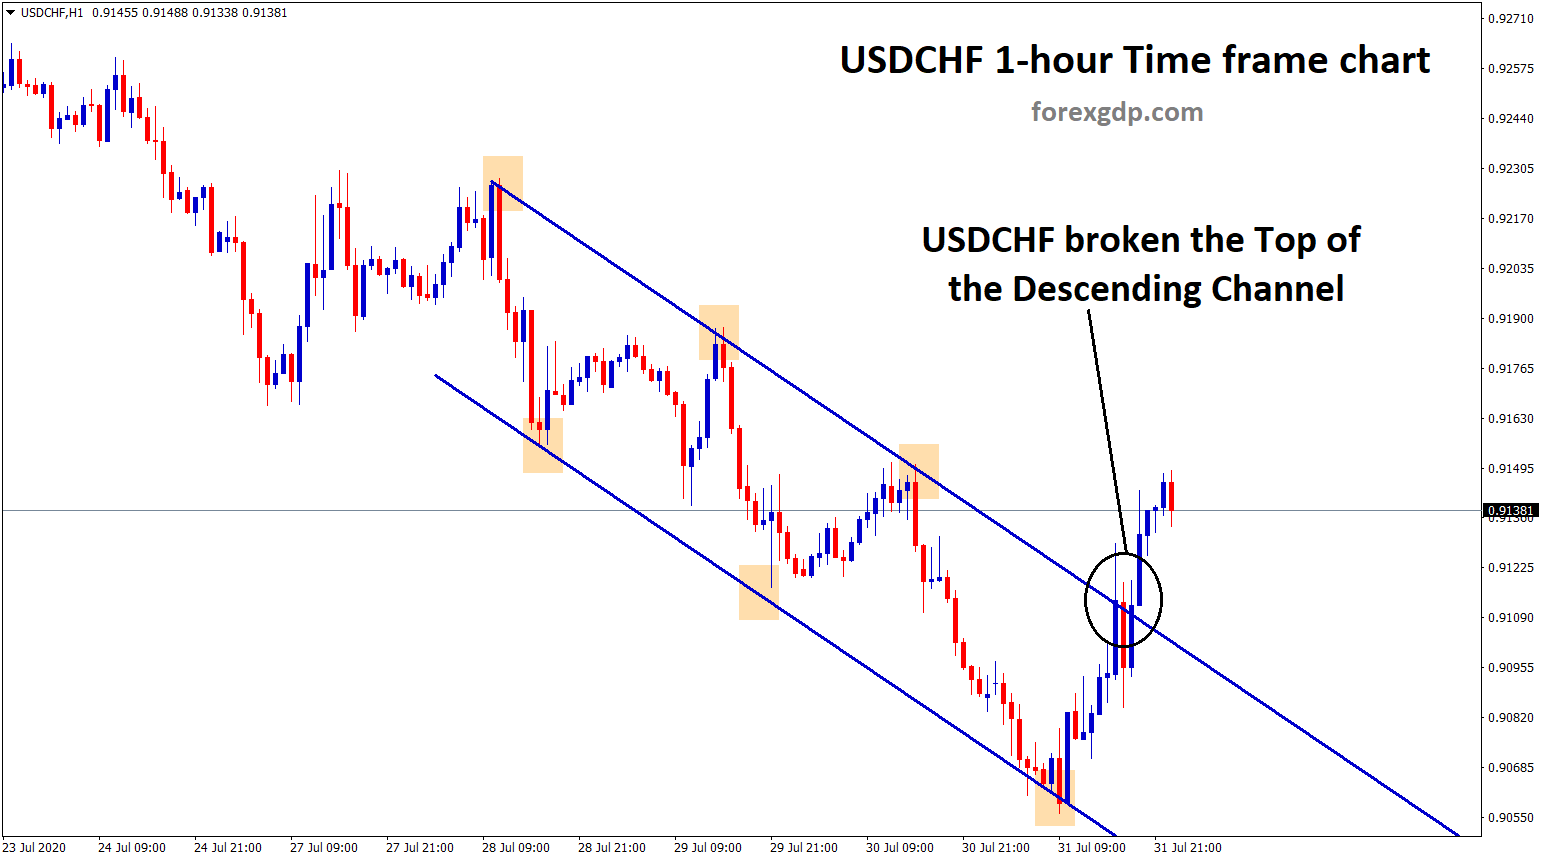 USDCHF broken the top of descending channel in h1